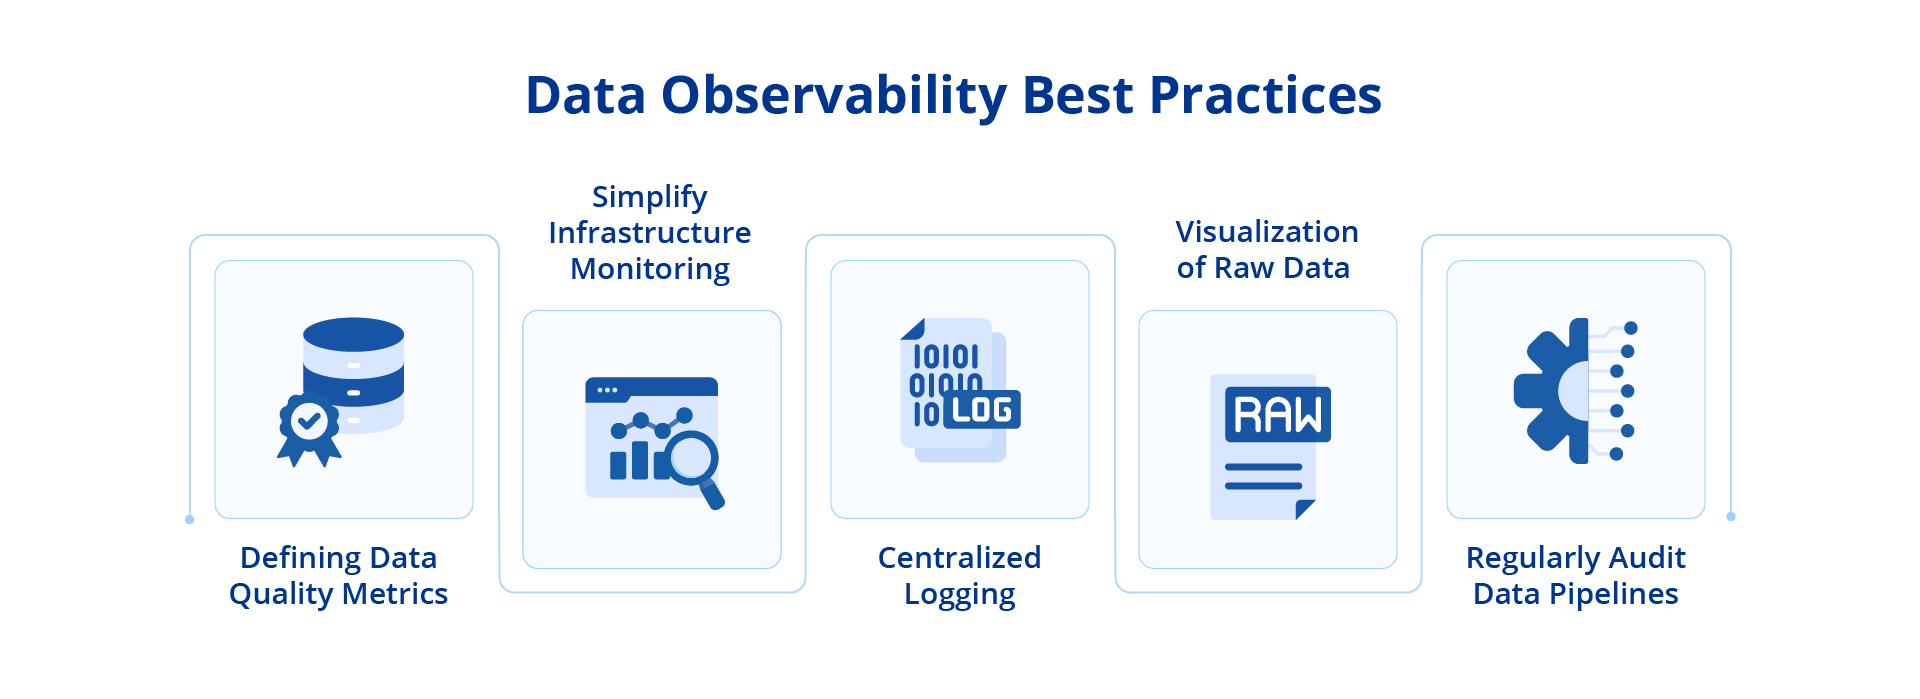 Image showing the best practices to follow for data observability 